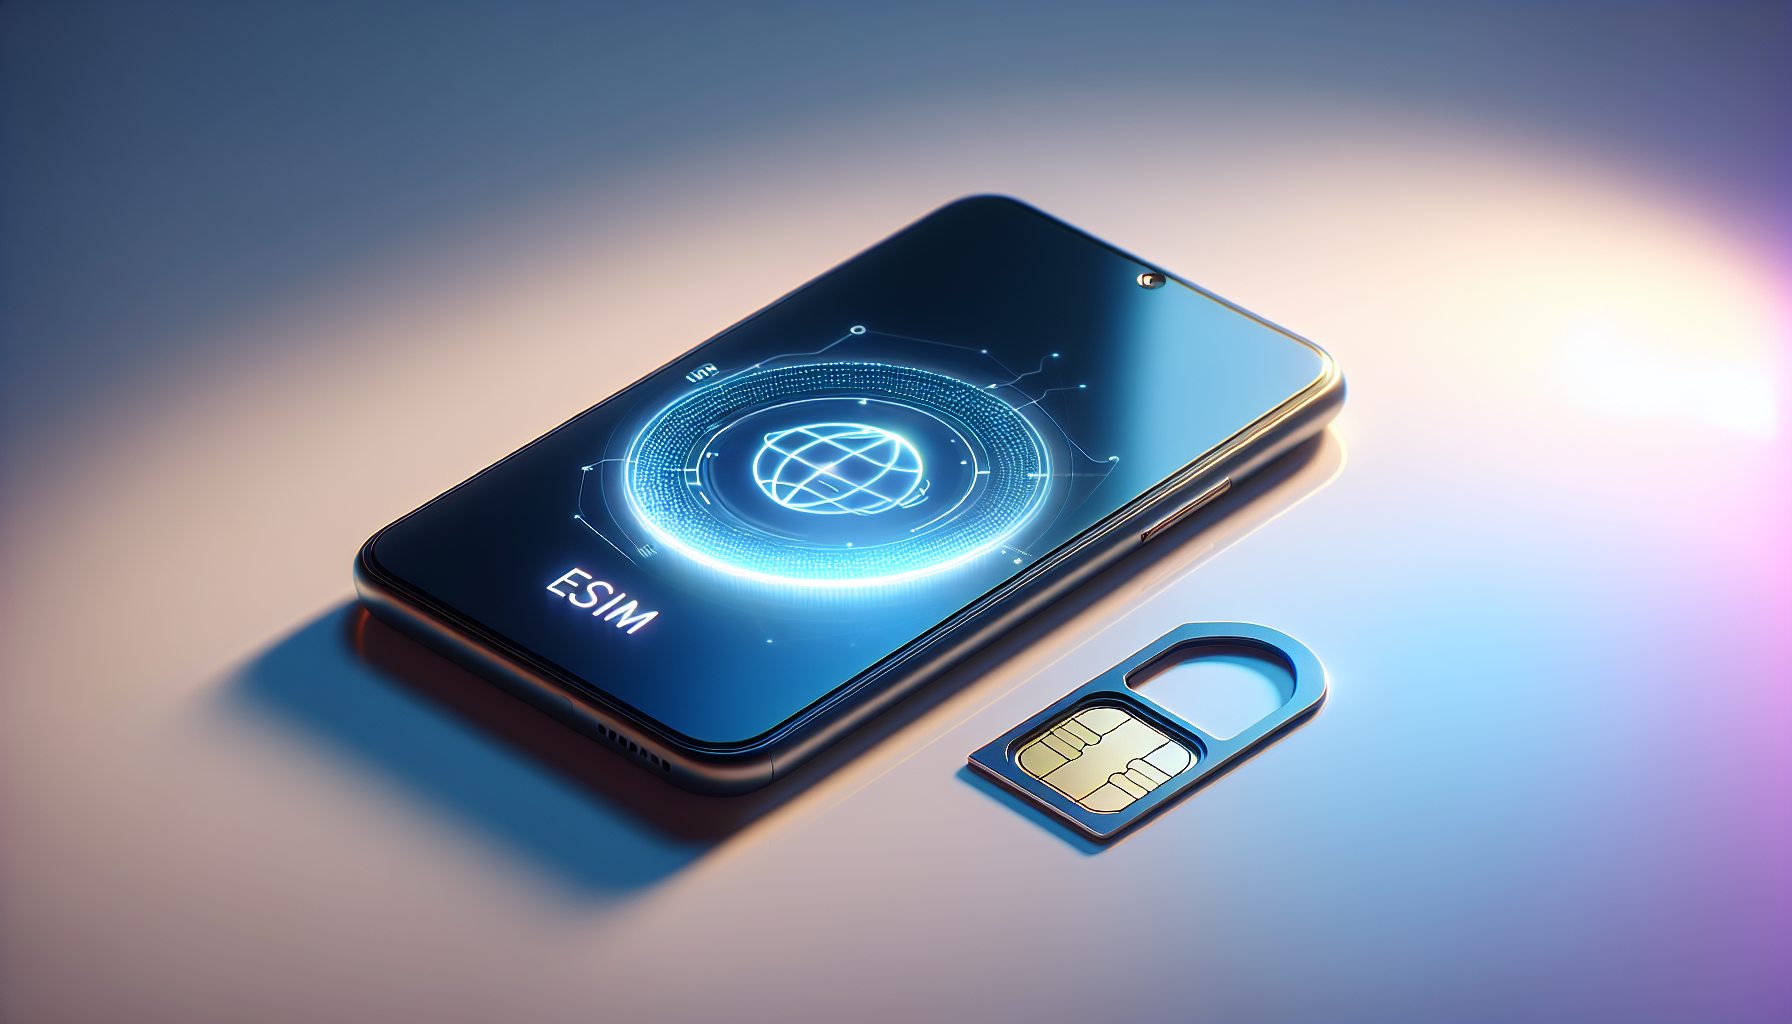 Illustration of a smartphone with eSIM technology and a physical SIM card slot